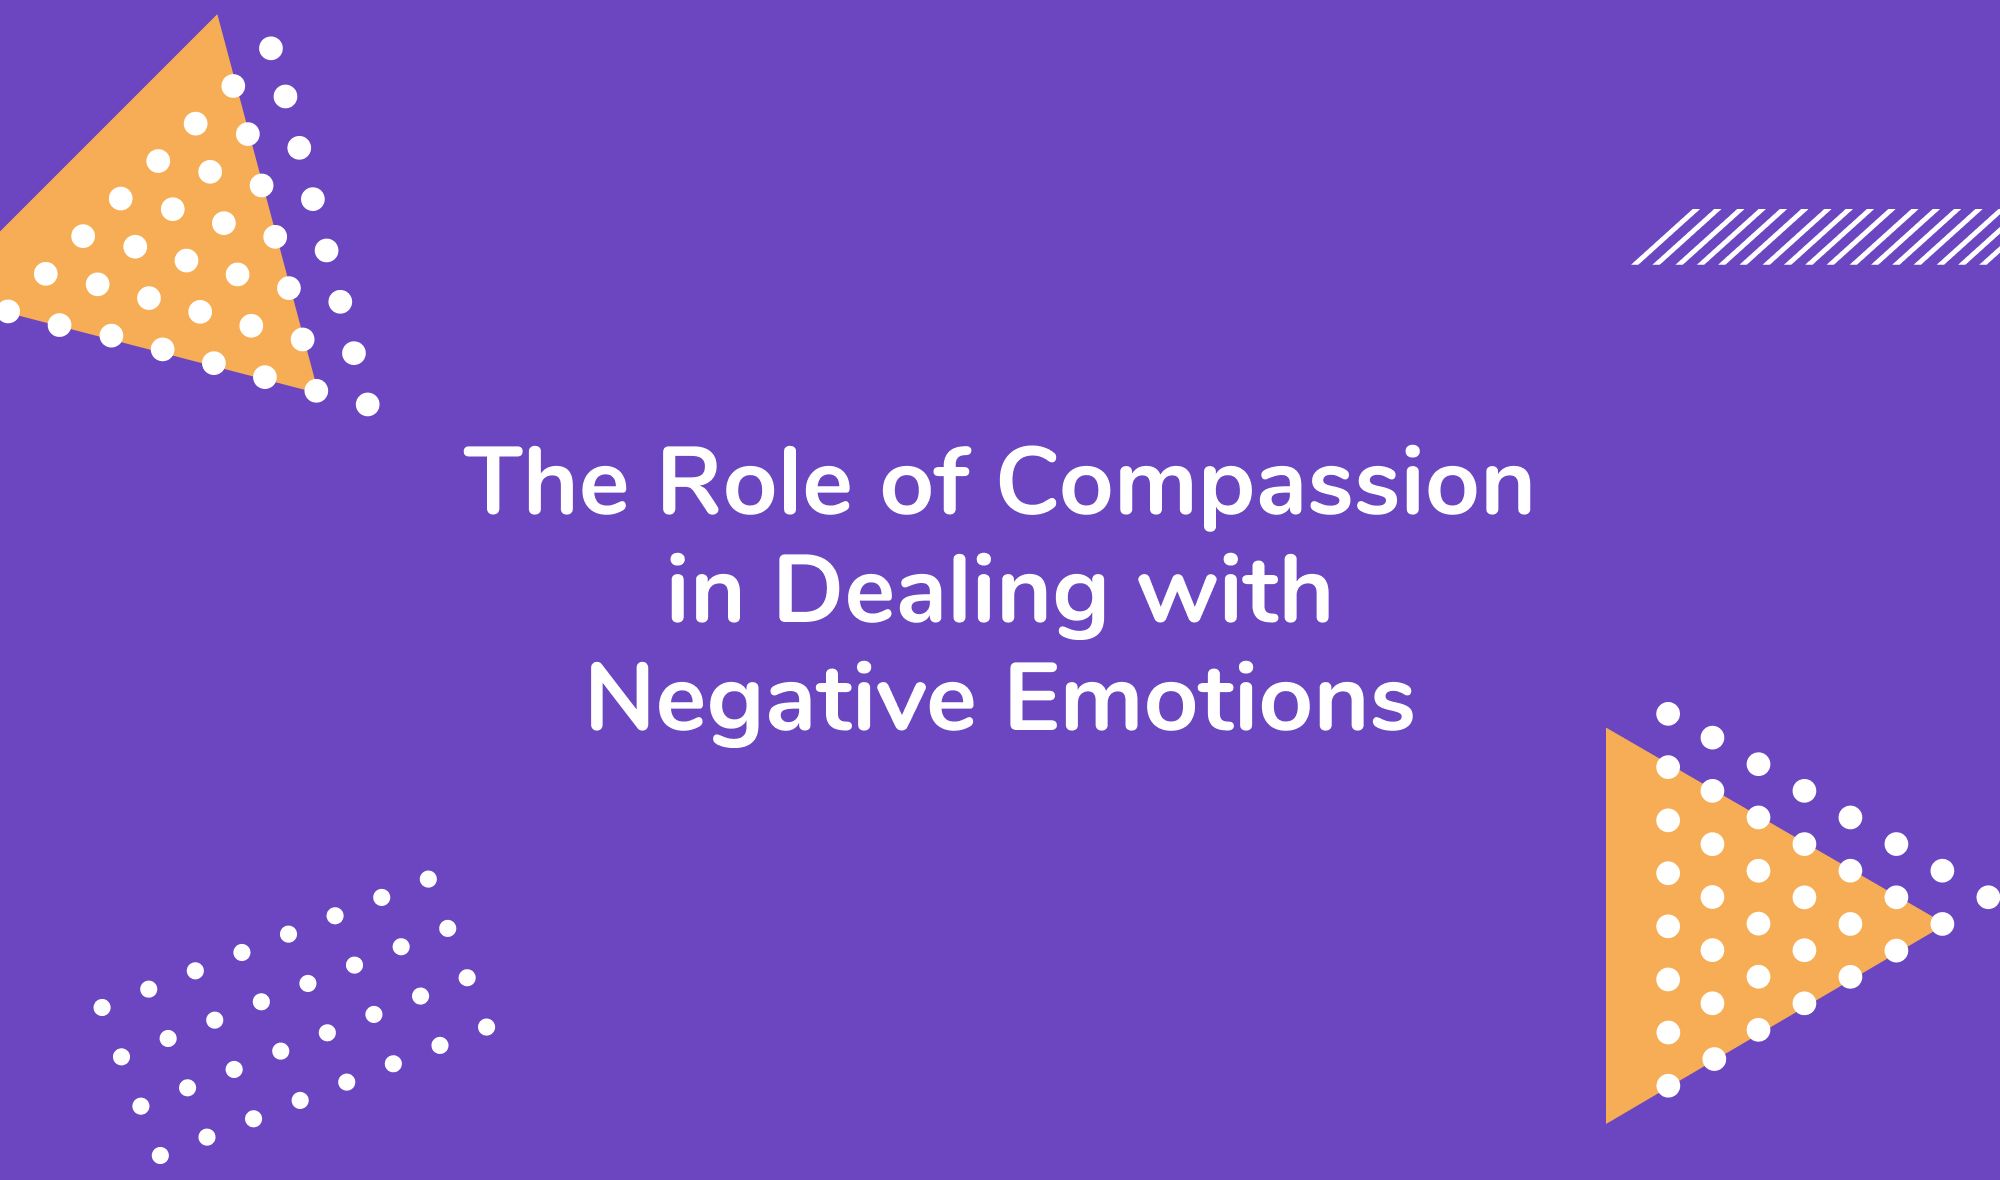 The Role of Compassion in Dealing with Negative Emotions